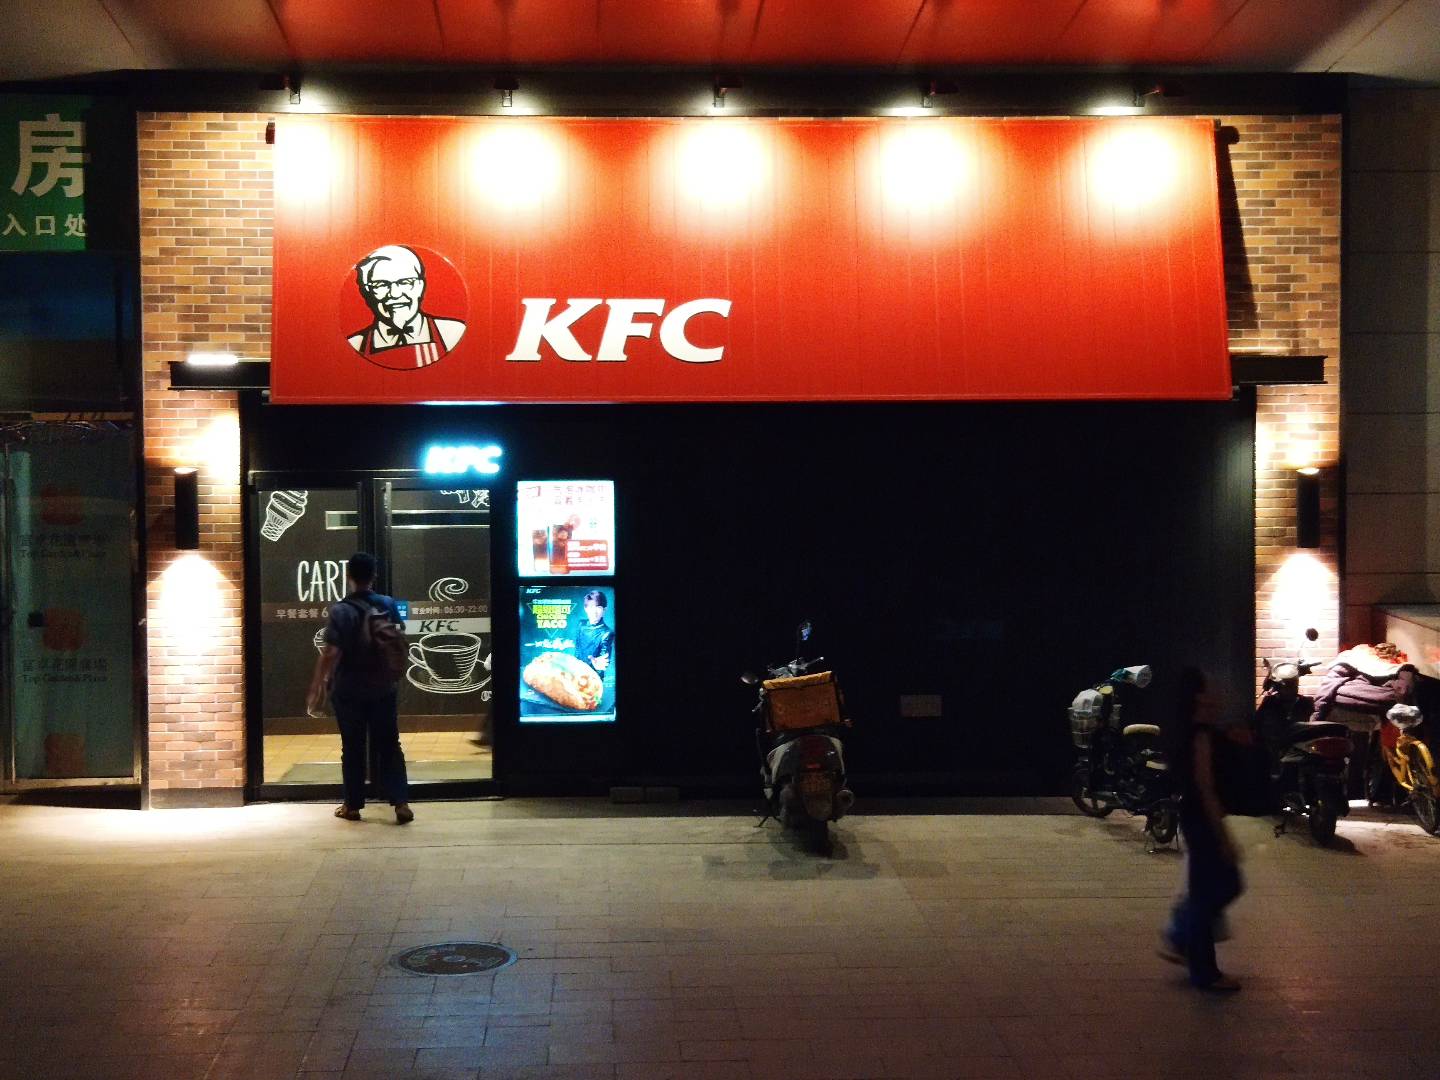 In China, KFC is basically a Chinese restaurant